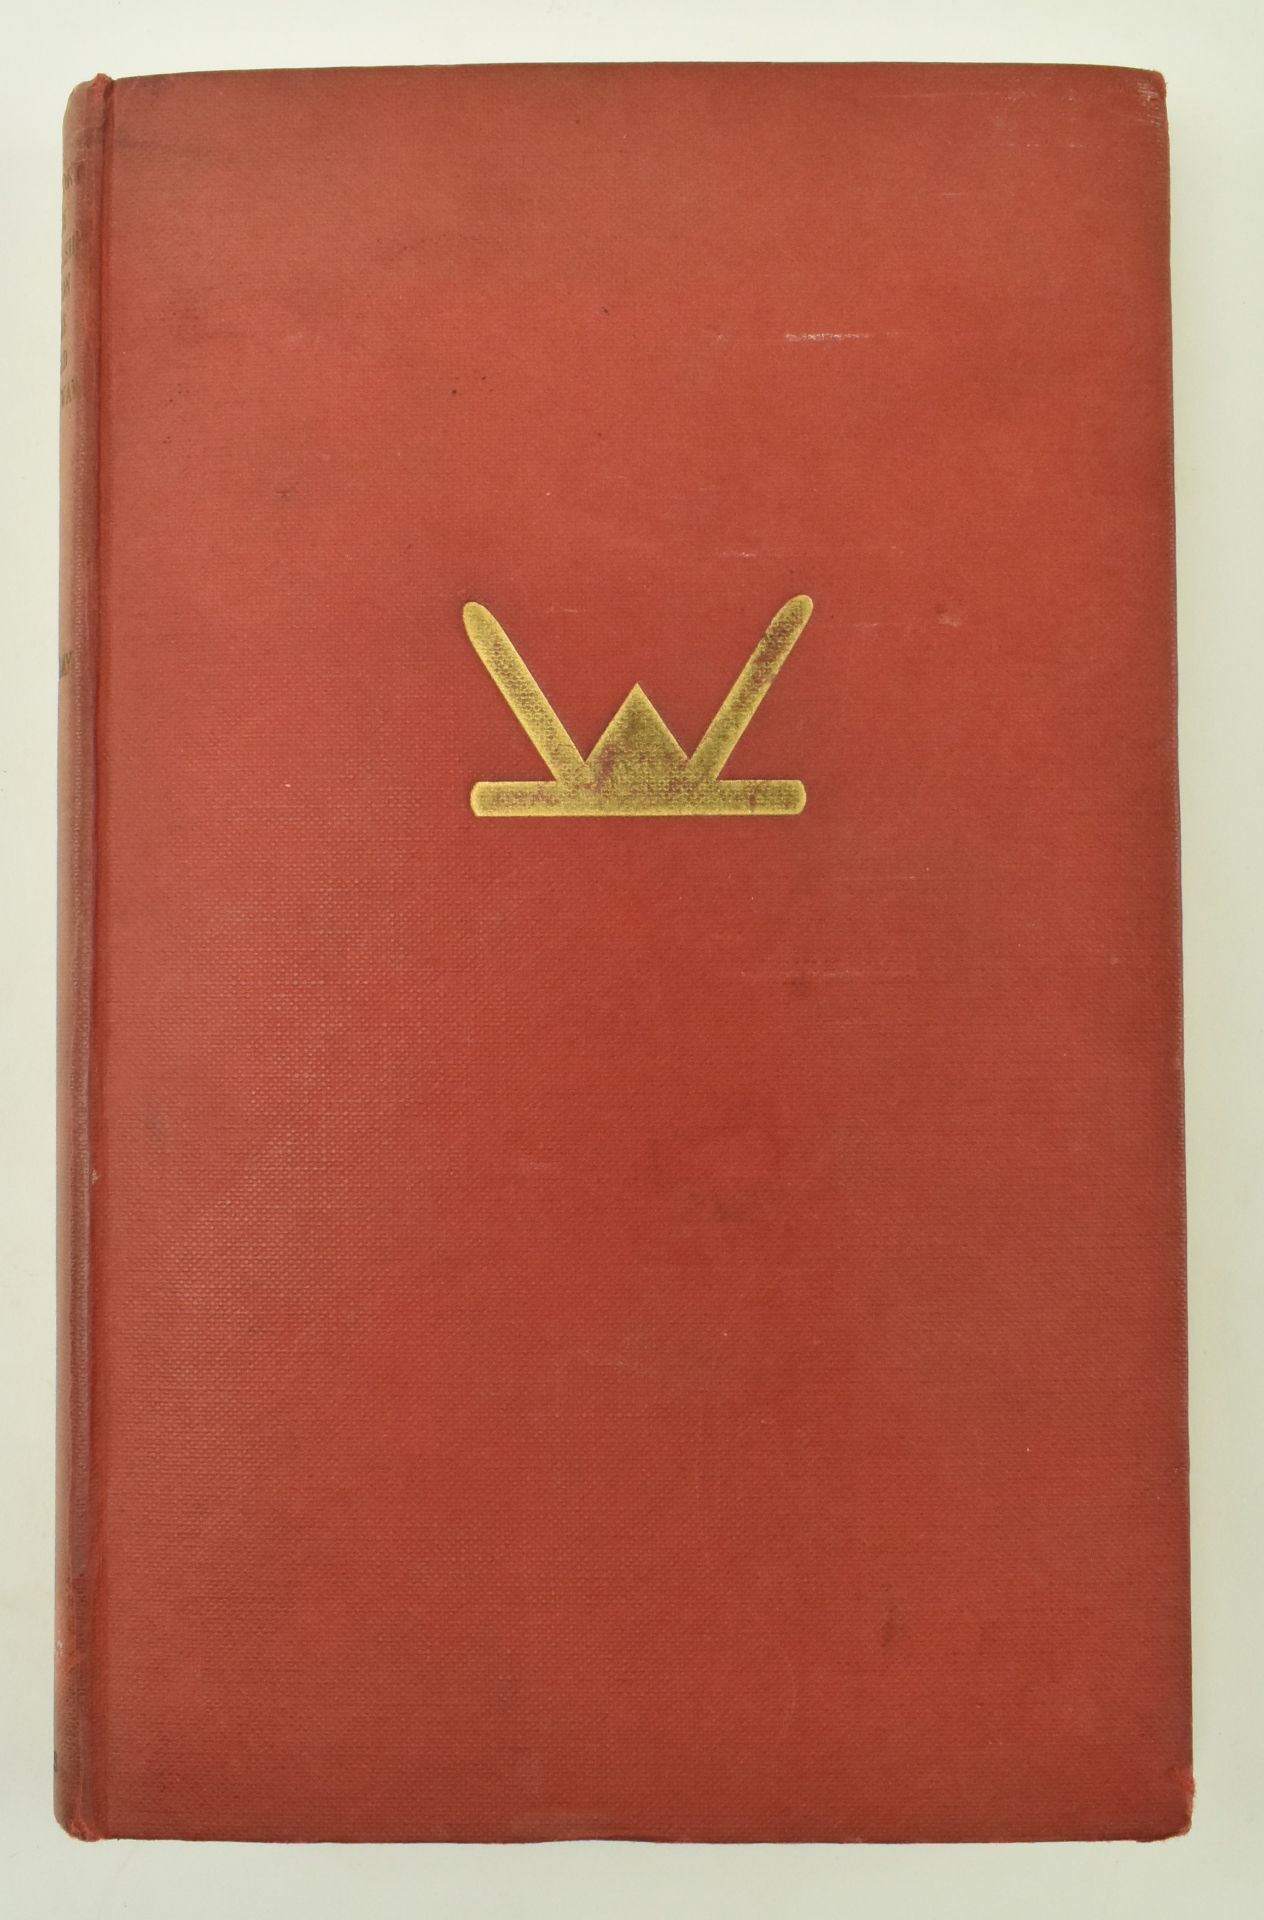 MILITARY WWI INTEREST. COLLECTION OF BOOKS ON THE GREAT WAR - Image 8 of 10